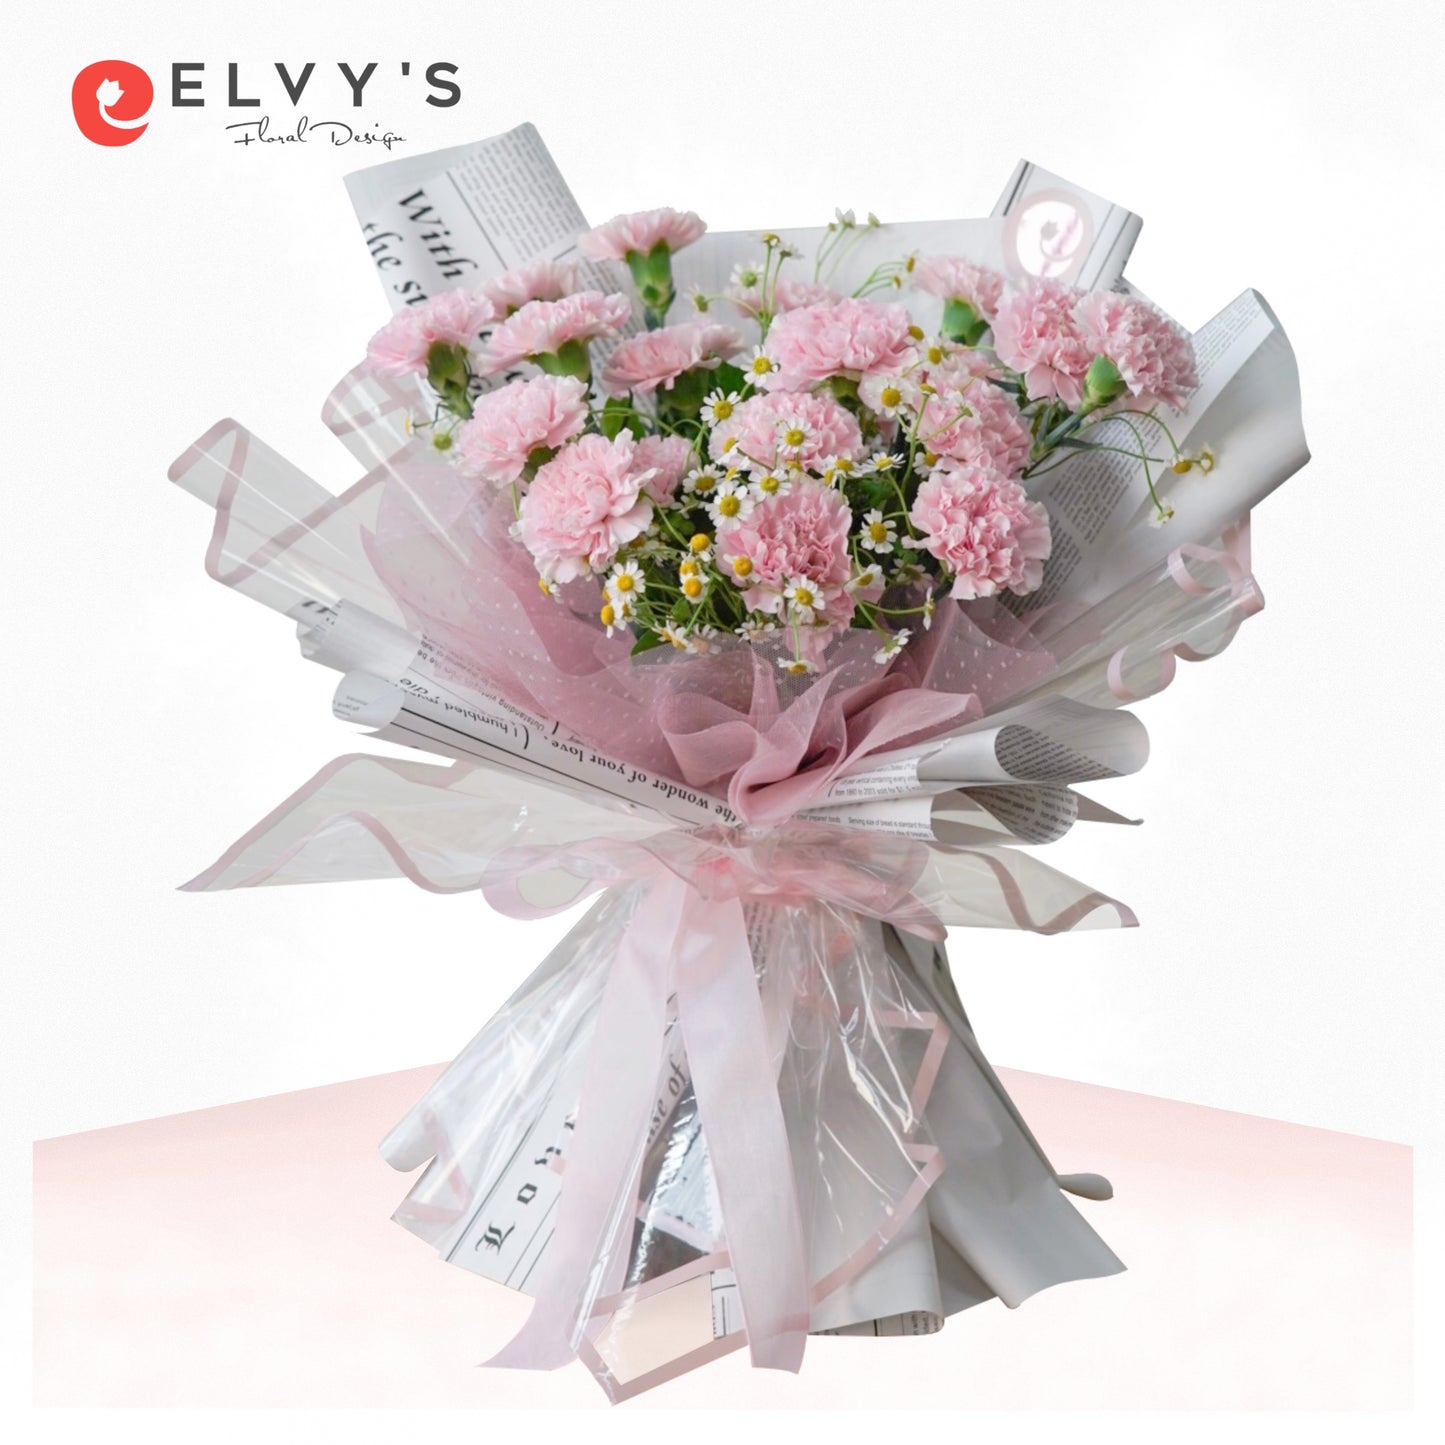 Wedding Flowers and Unique Gifts | Elvys Floral Design